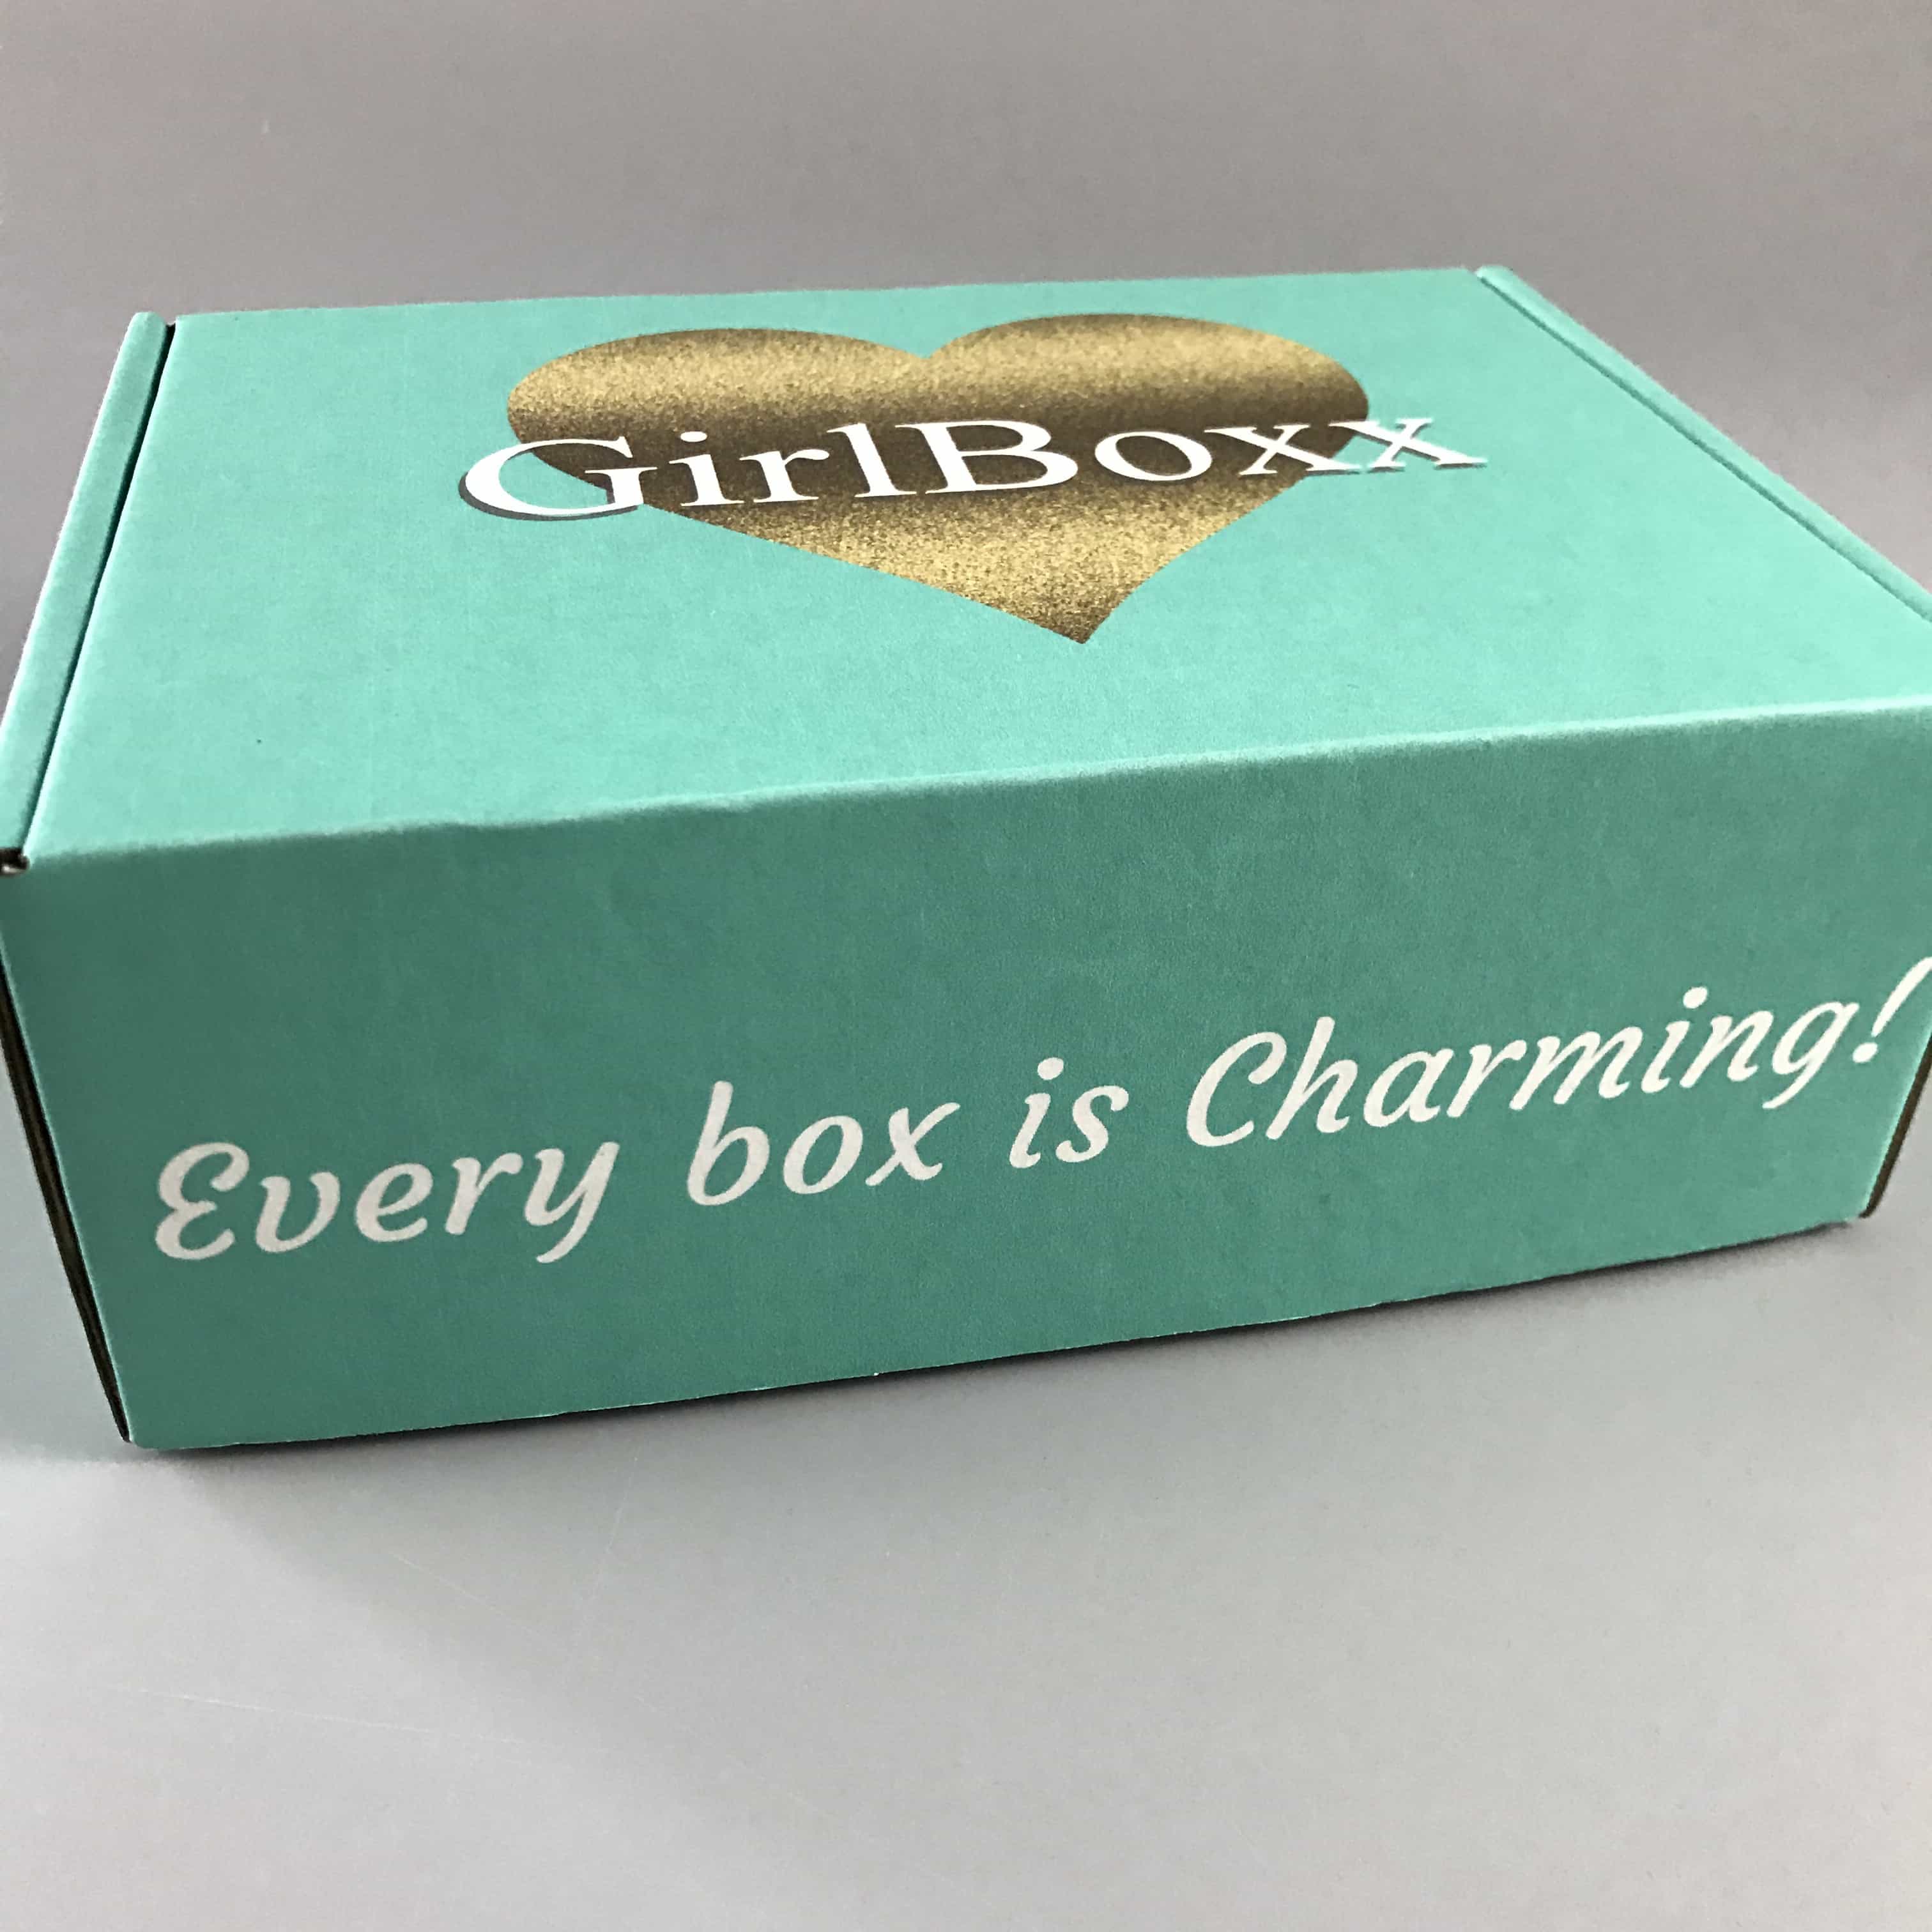 Review box